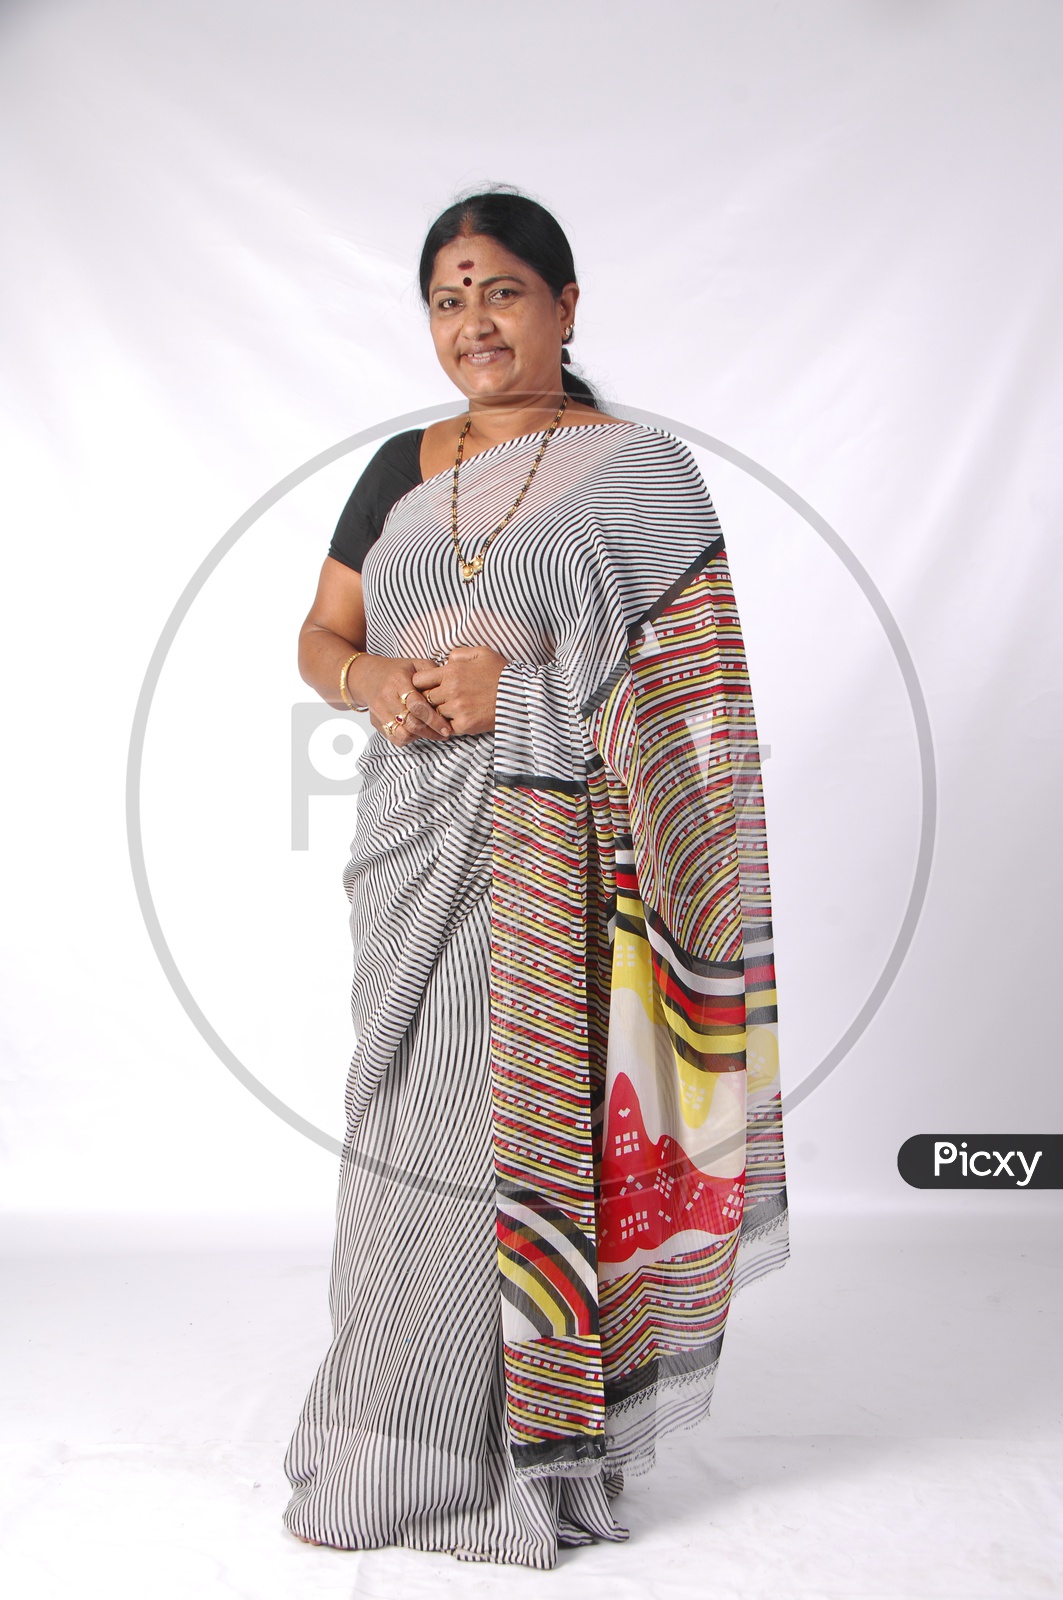 An Indian Woman In Casual Saree or Sari   With A Smile Face on an Isolated White Background